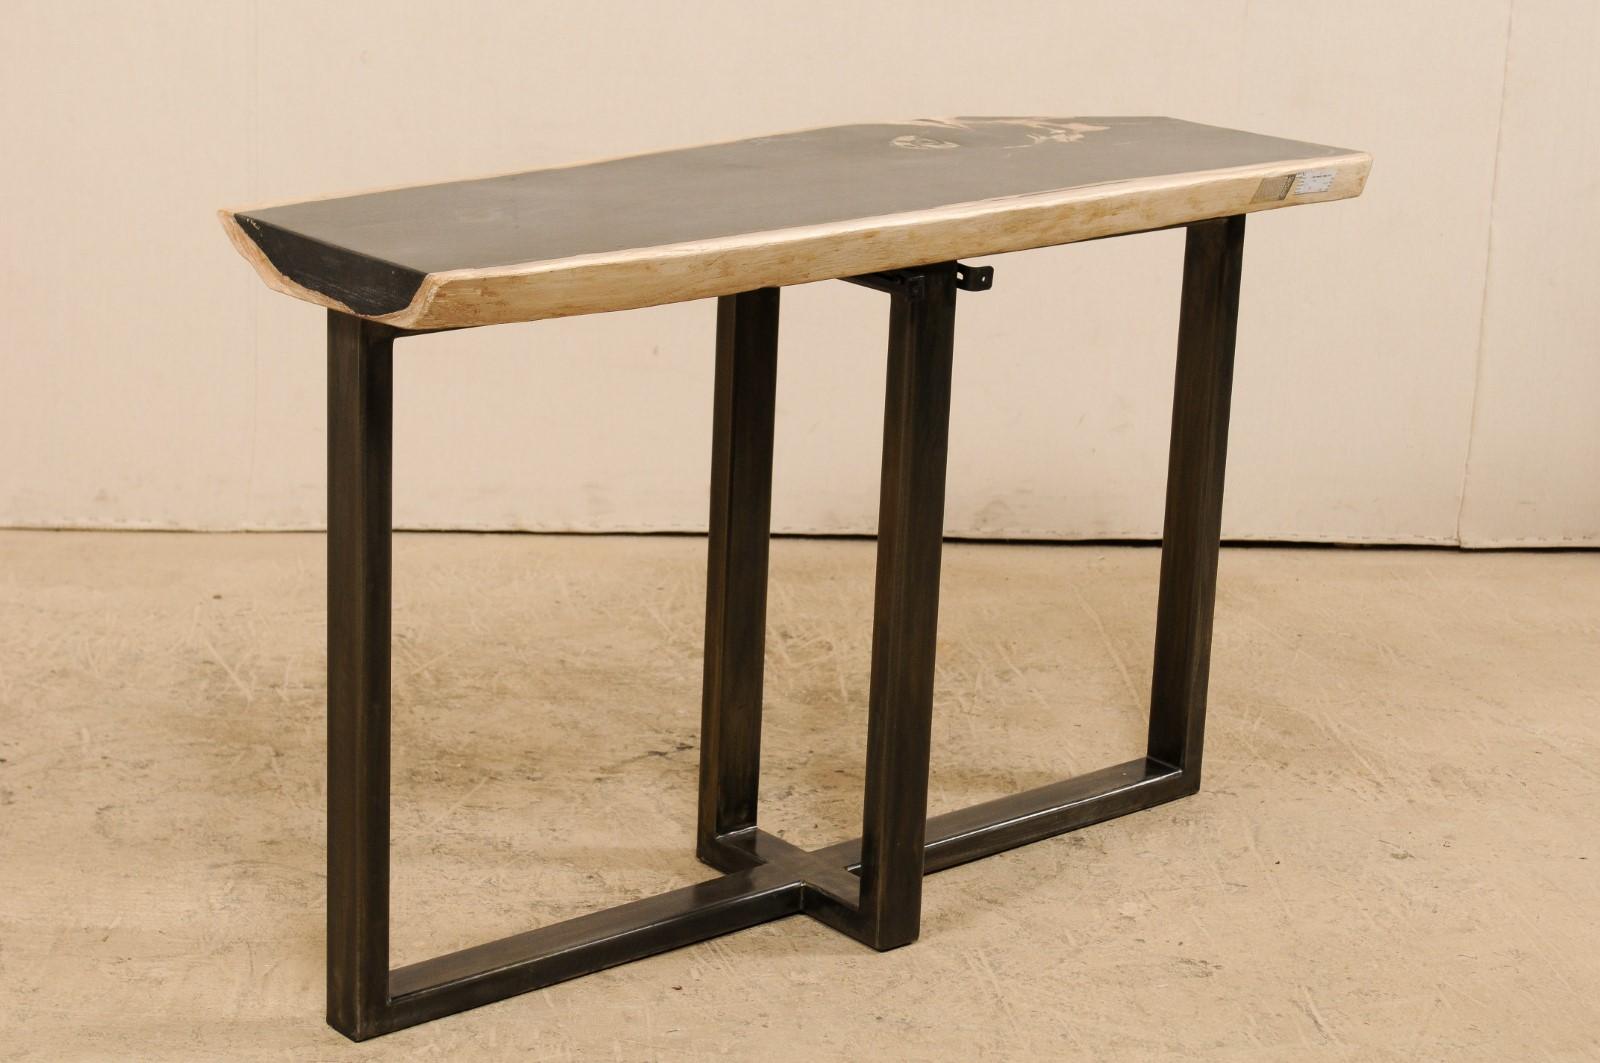 A petrified wood top modernly designed console table. This custom console table has been fashioned from a single thick slab of smoothly polished petrified wood. This fabulous petrified wood top is mostly black with shades of tan and bone at its